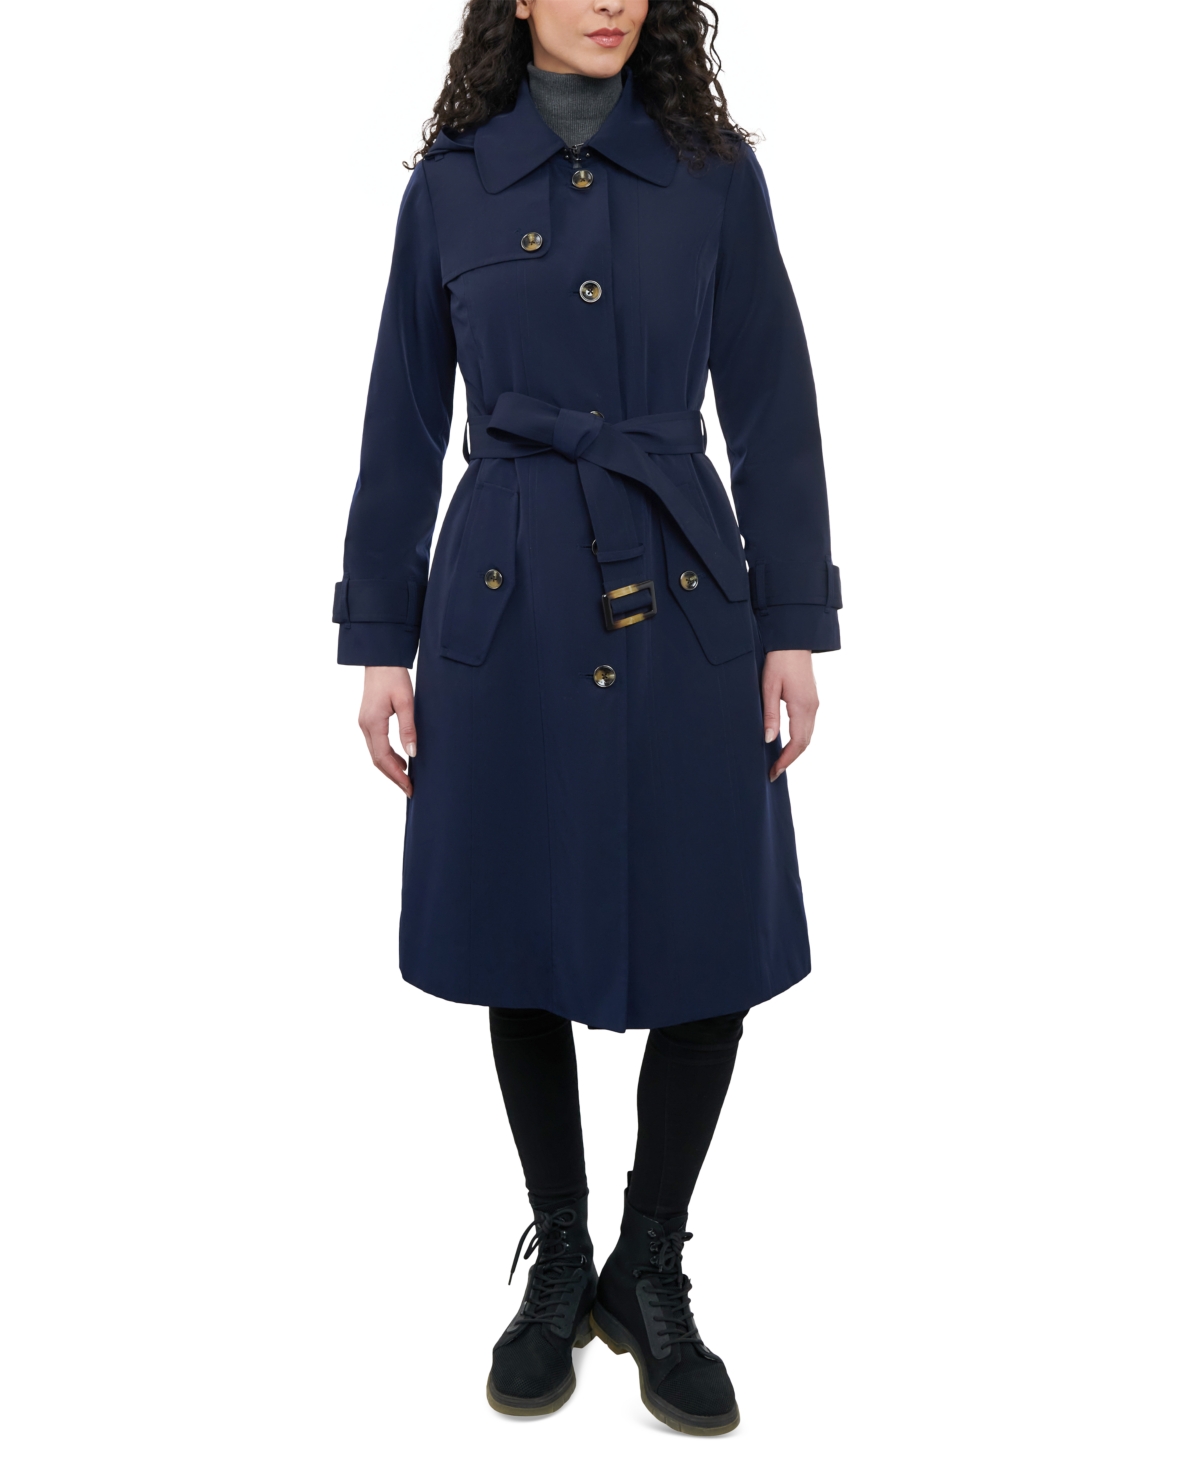 Women's Single-Breasted Hooded Trench Coat - Midnight Navy